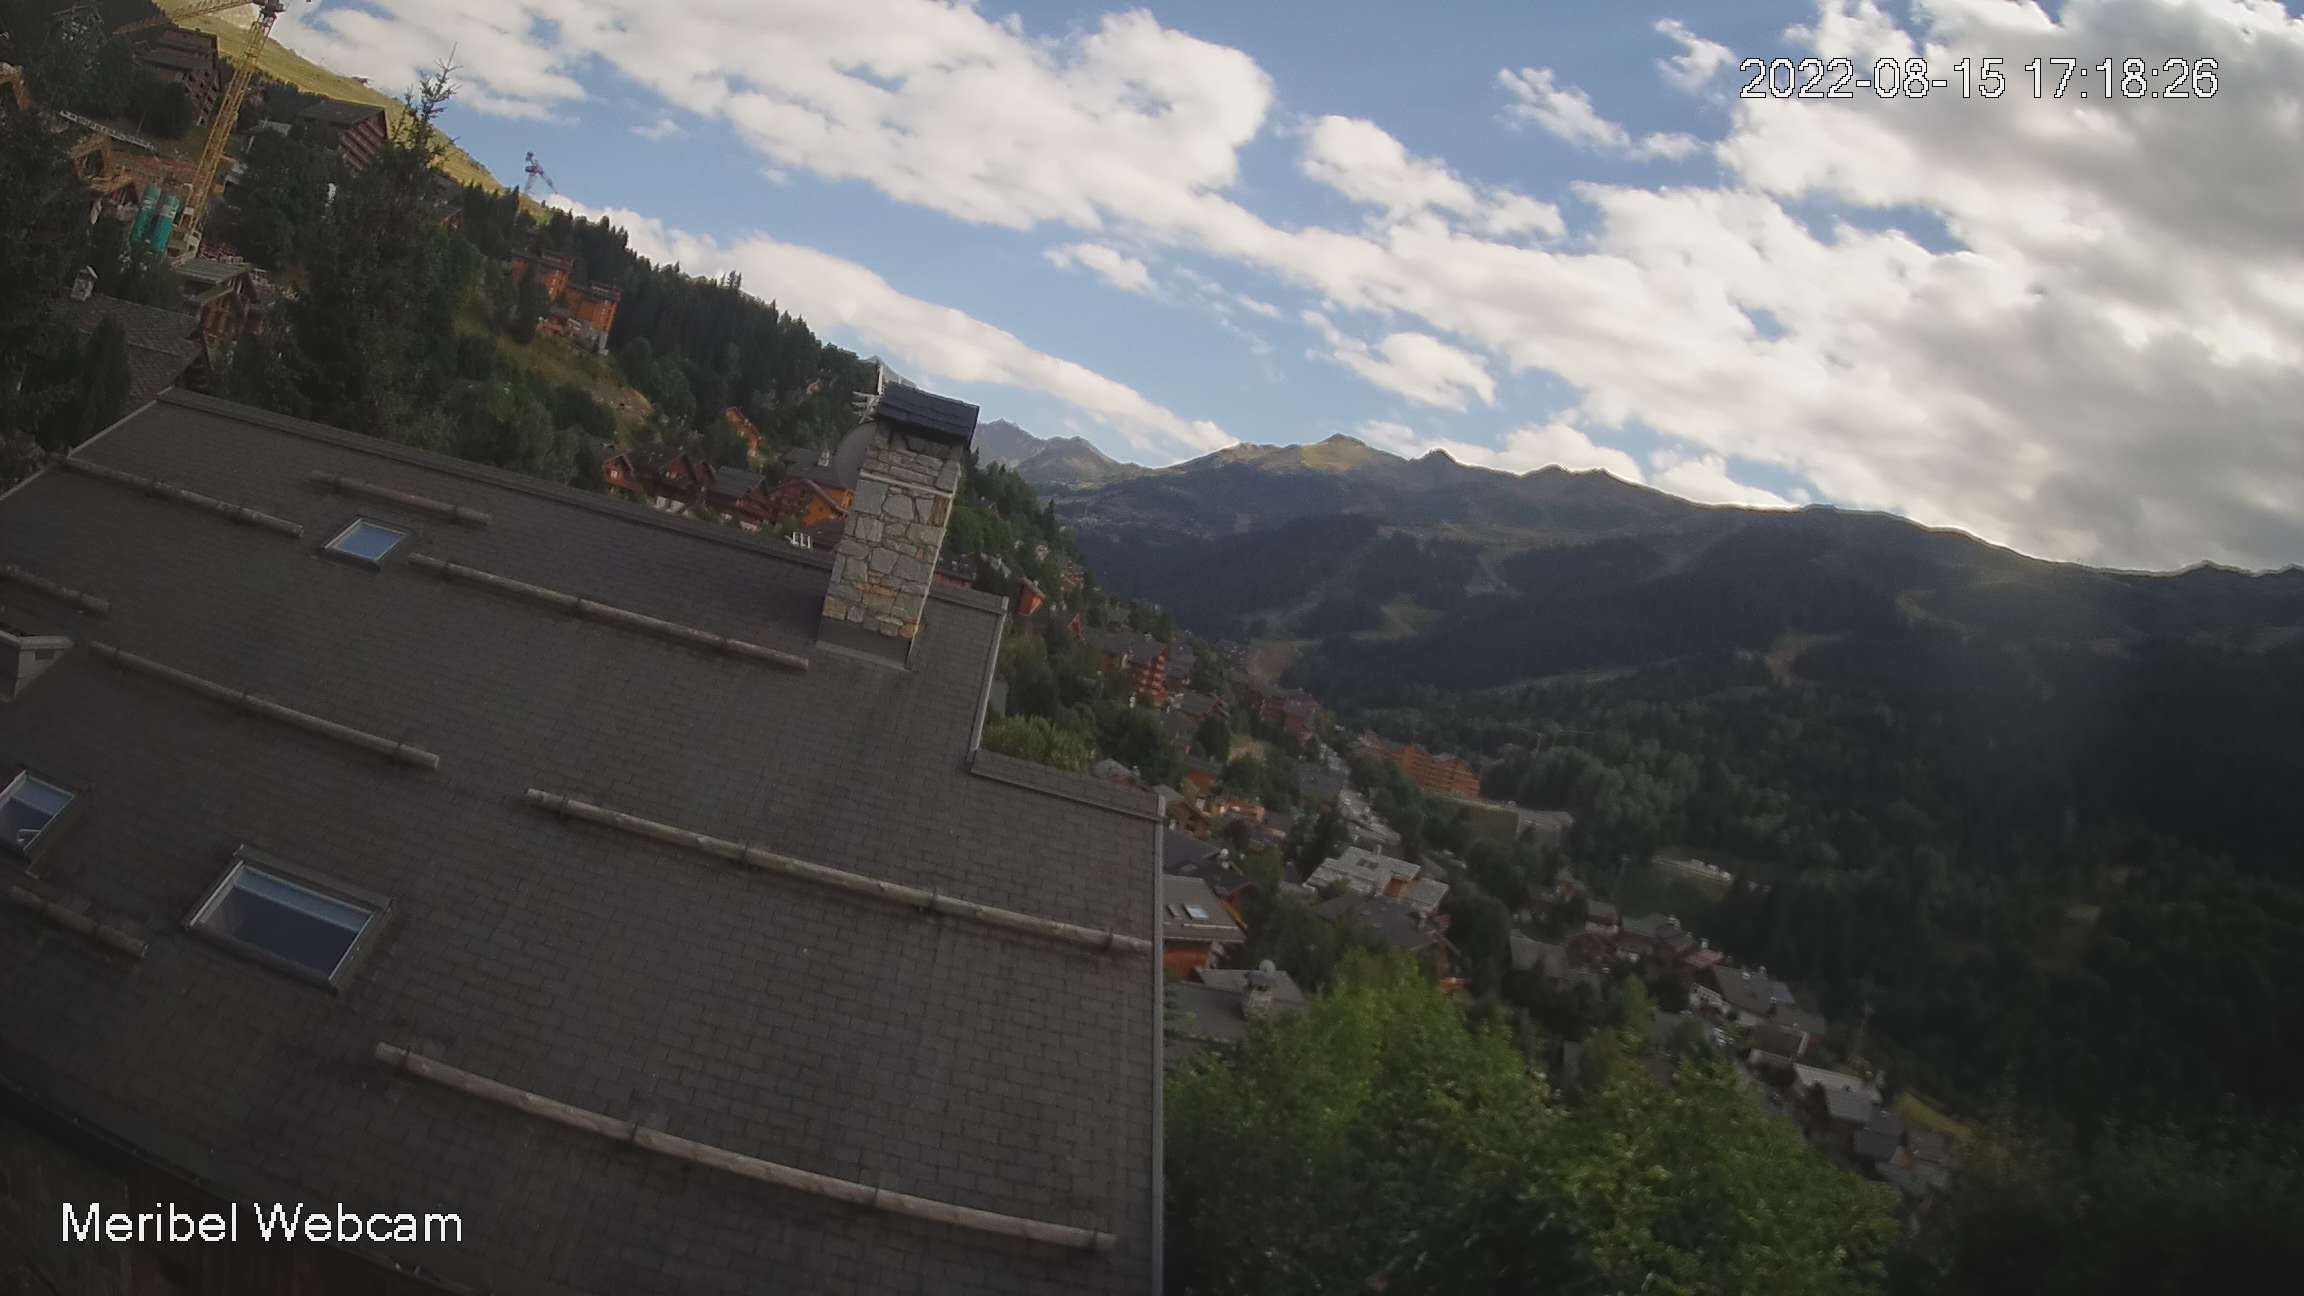 This Webcam is on Chalet La Chouette. This is the view from our balcony along the Meribel Valley